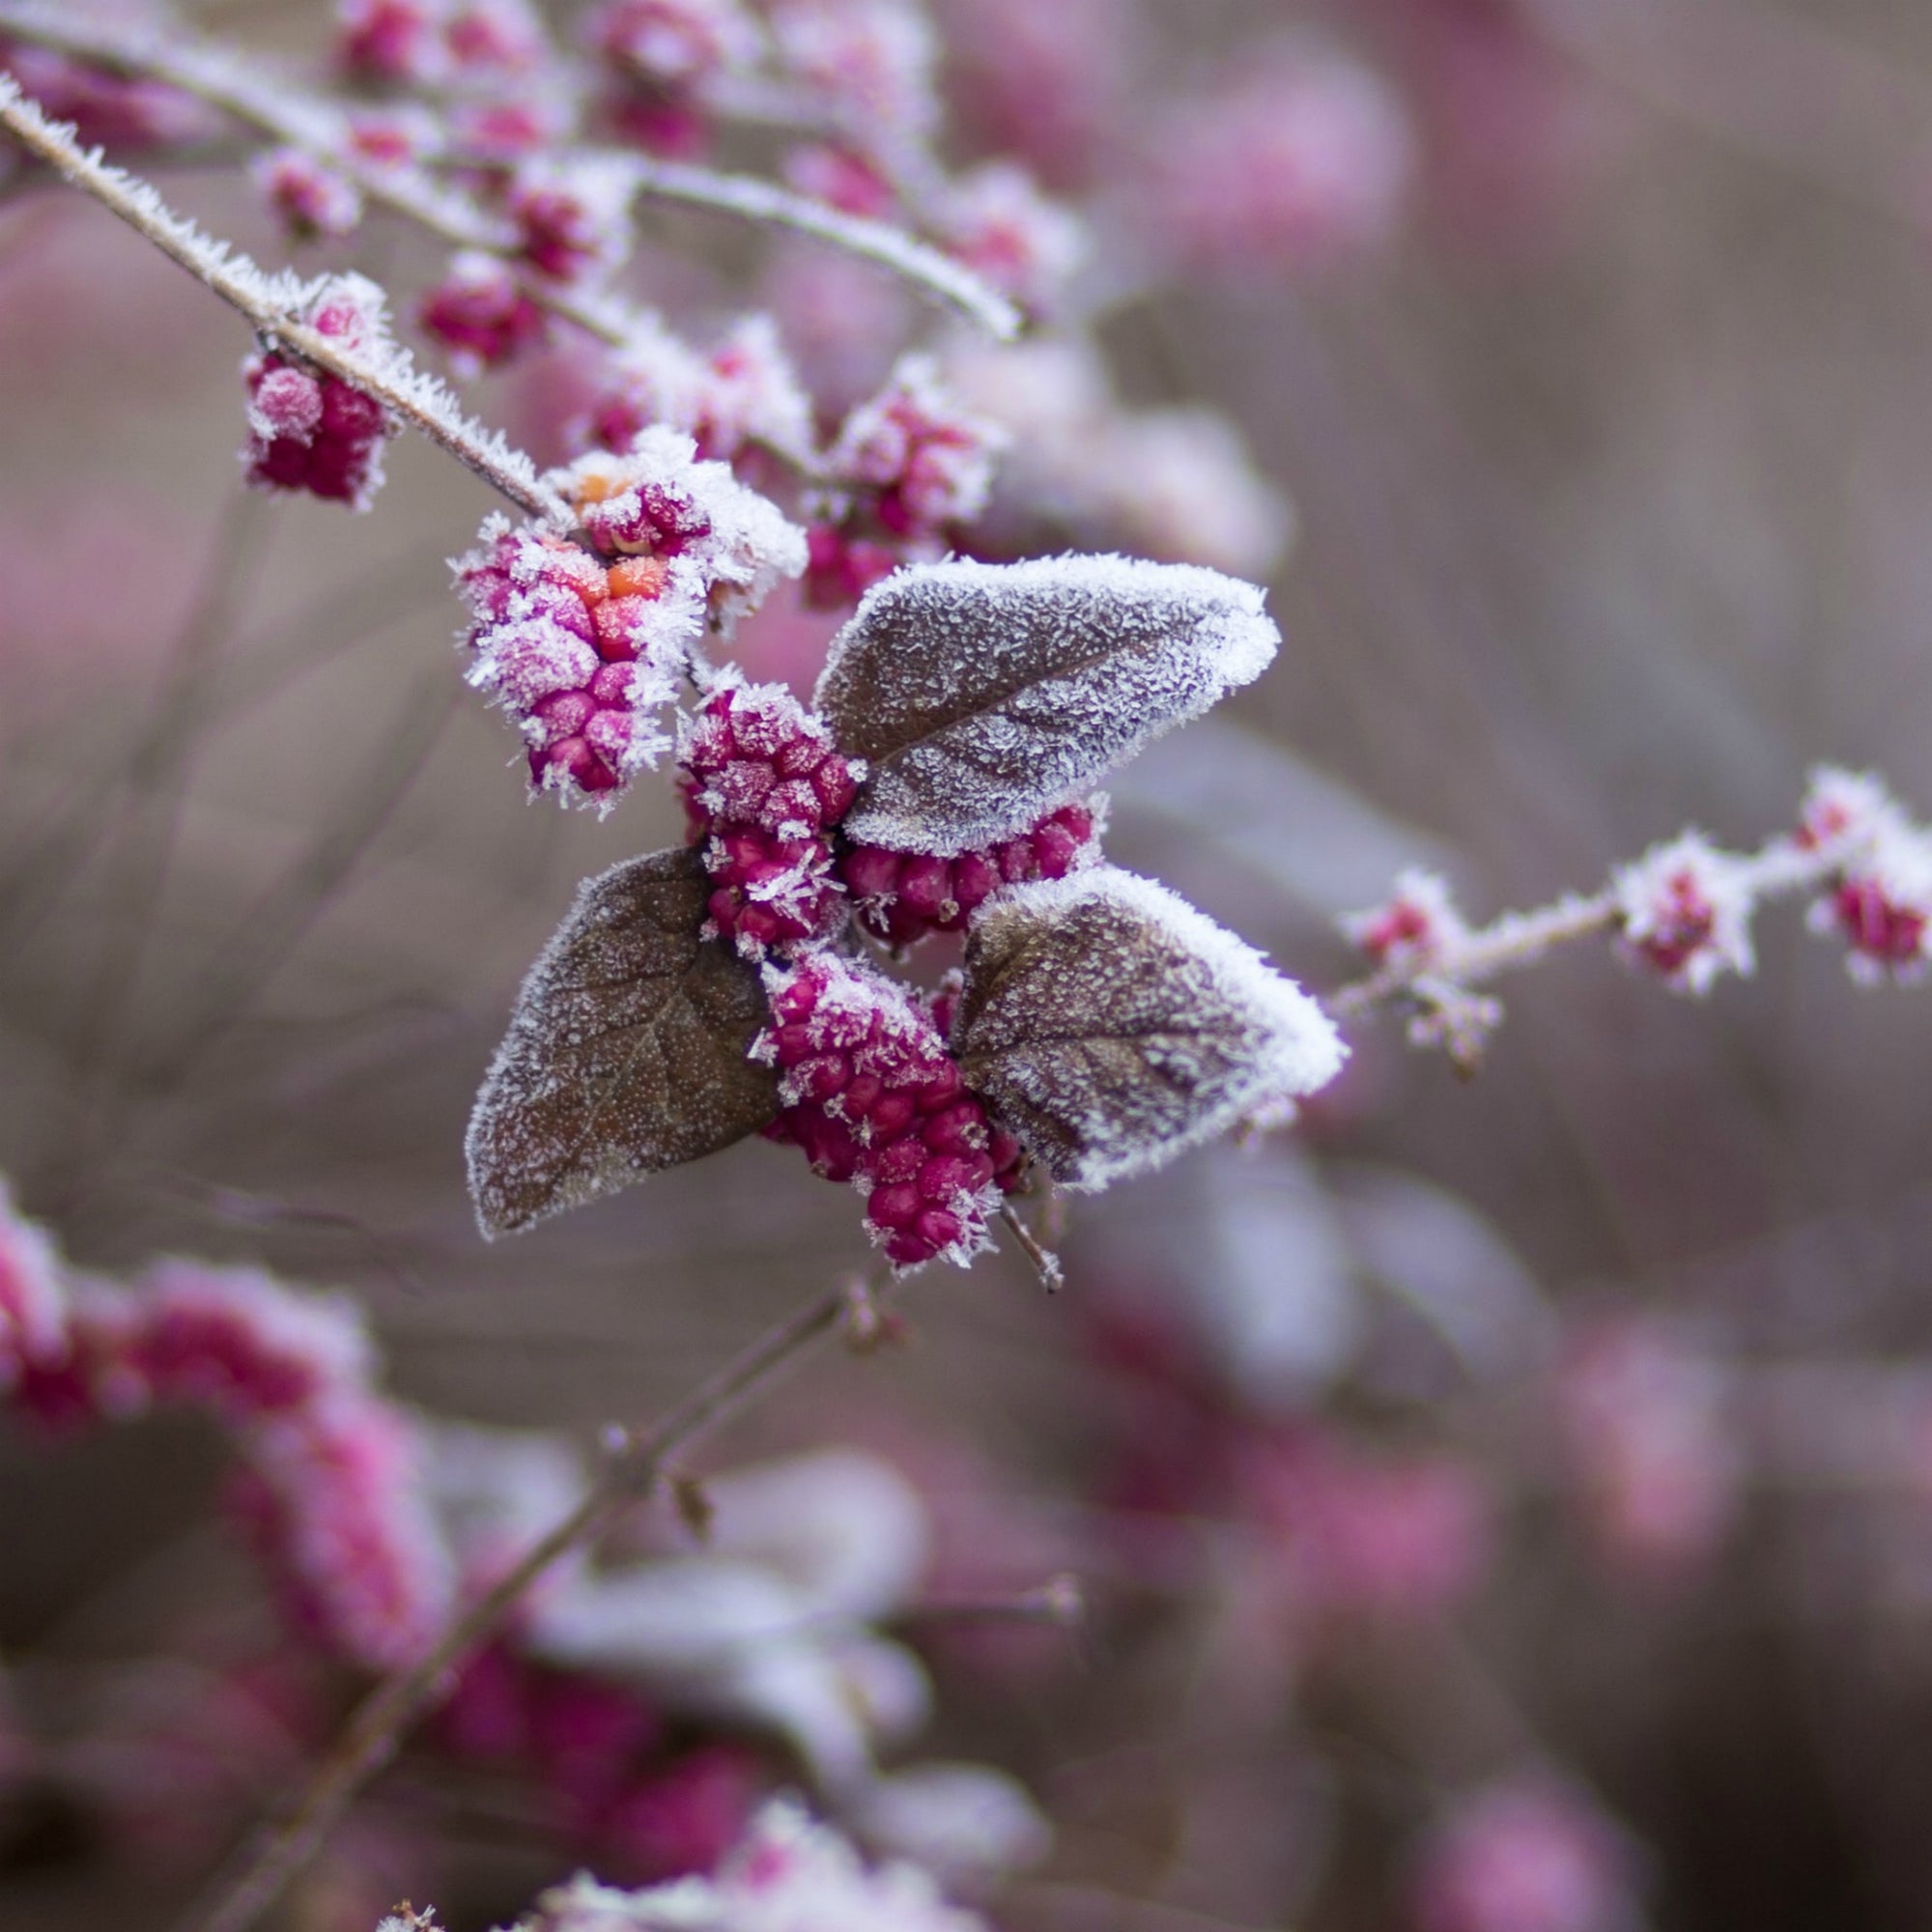 Winter Berries, frosted in the cold